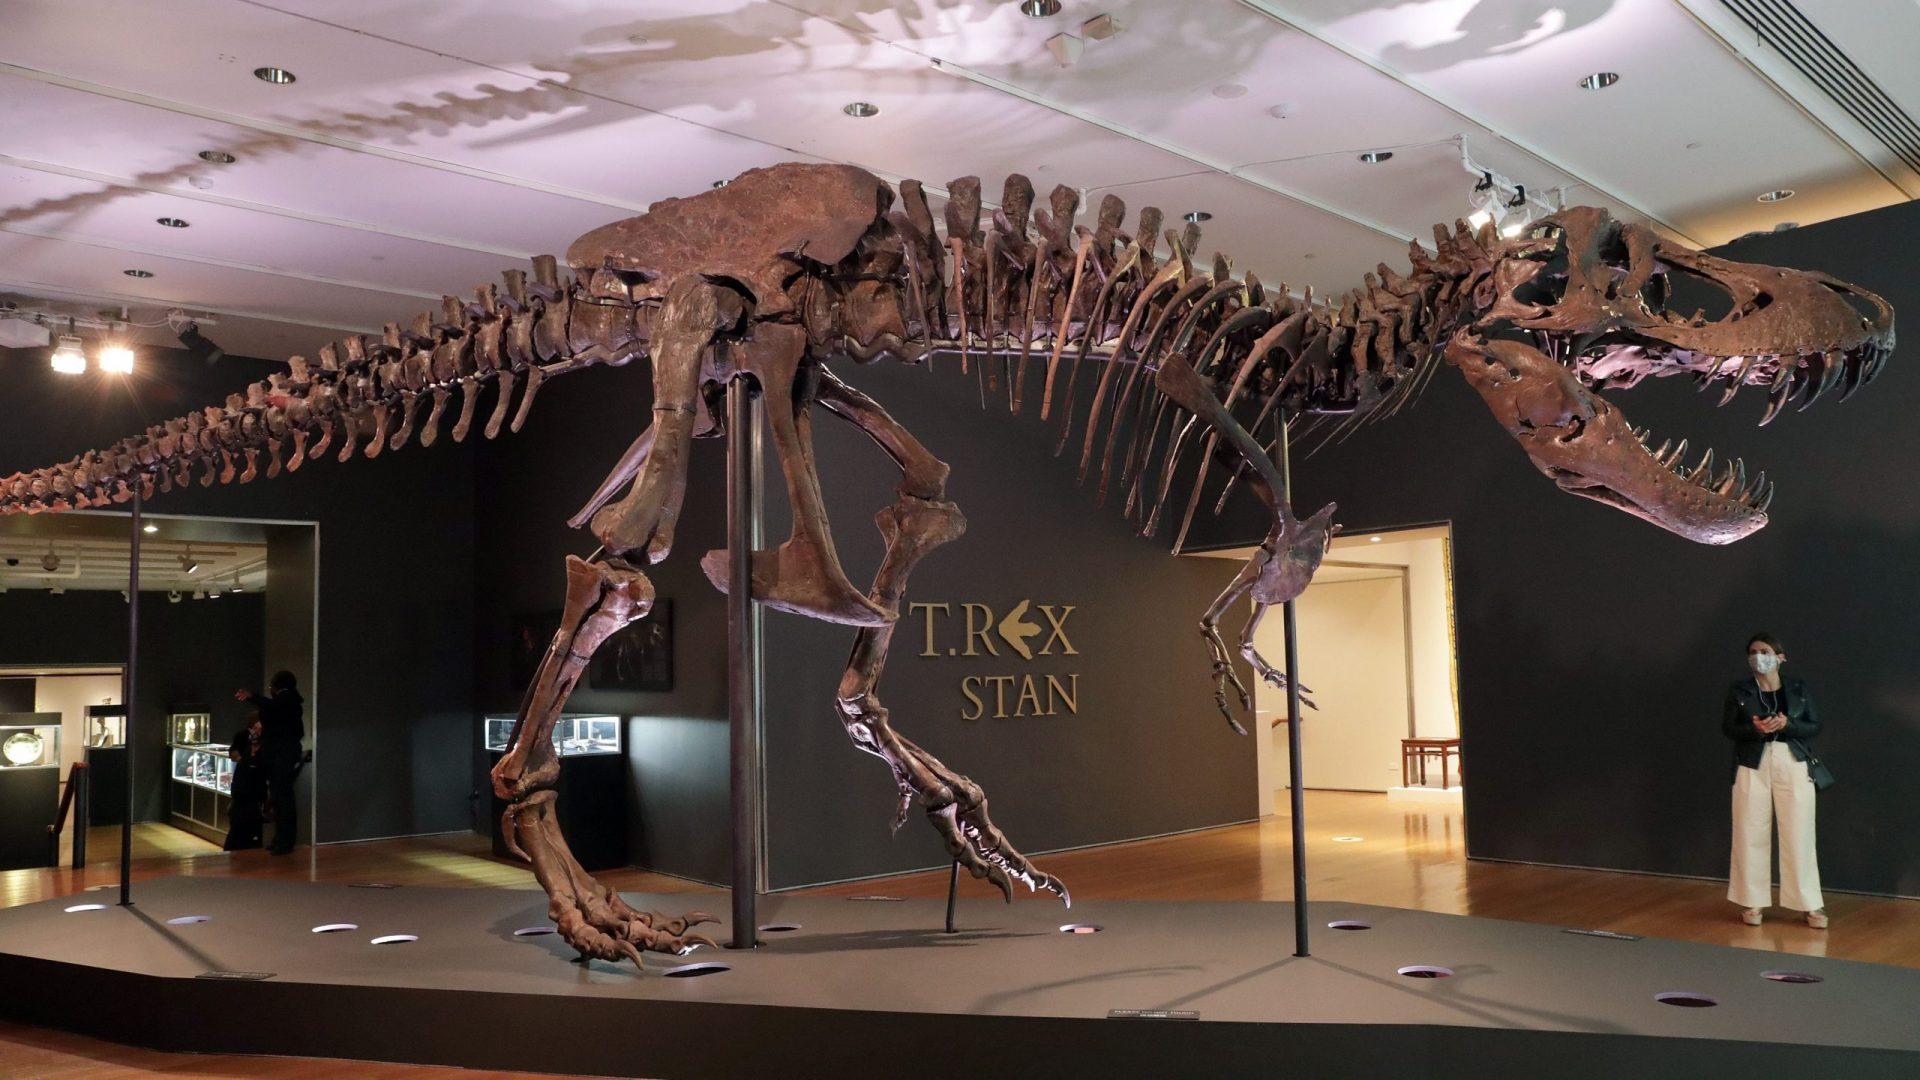 Mandatory Credit: Photo by Andrew Schwartz/SIPA/Shutterstock (10786710x)The fossil remains of a Tyrannosaurus rex named "Stan" is on display in a gallery at Christie's auction house on September 18, 2020 in New York City.